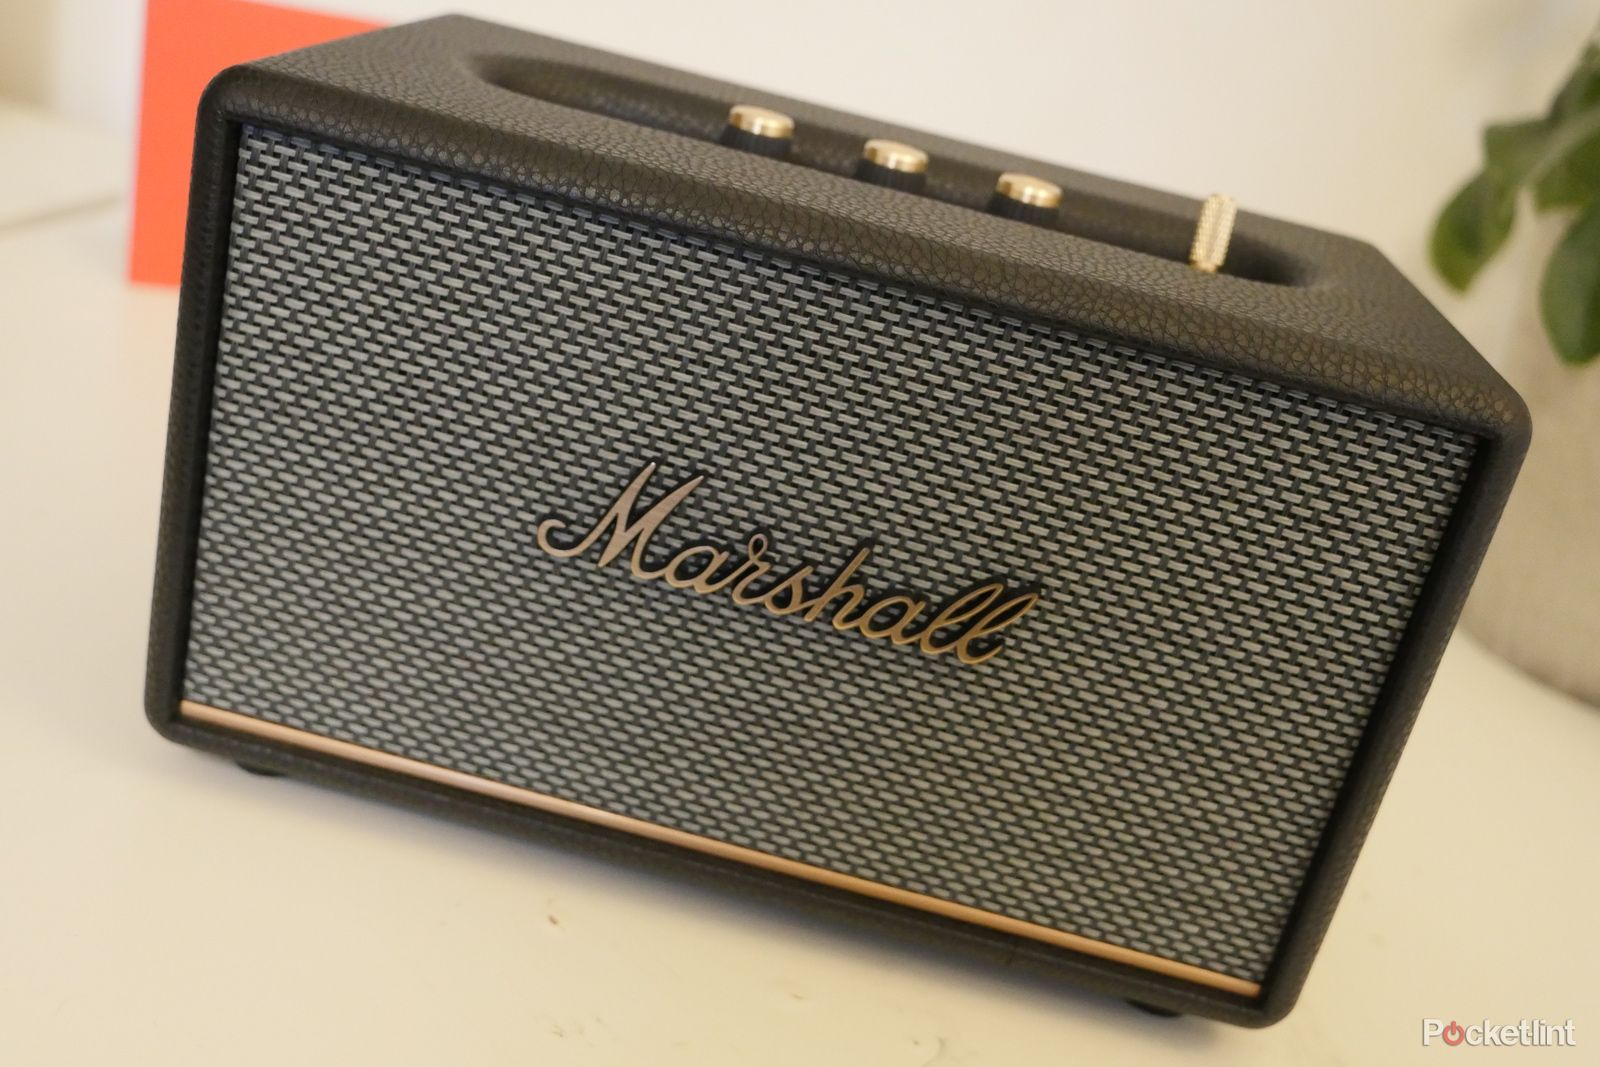 Marshall Acton III review - Which?